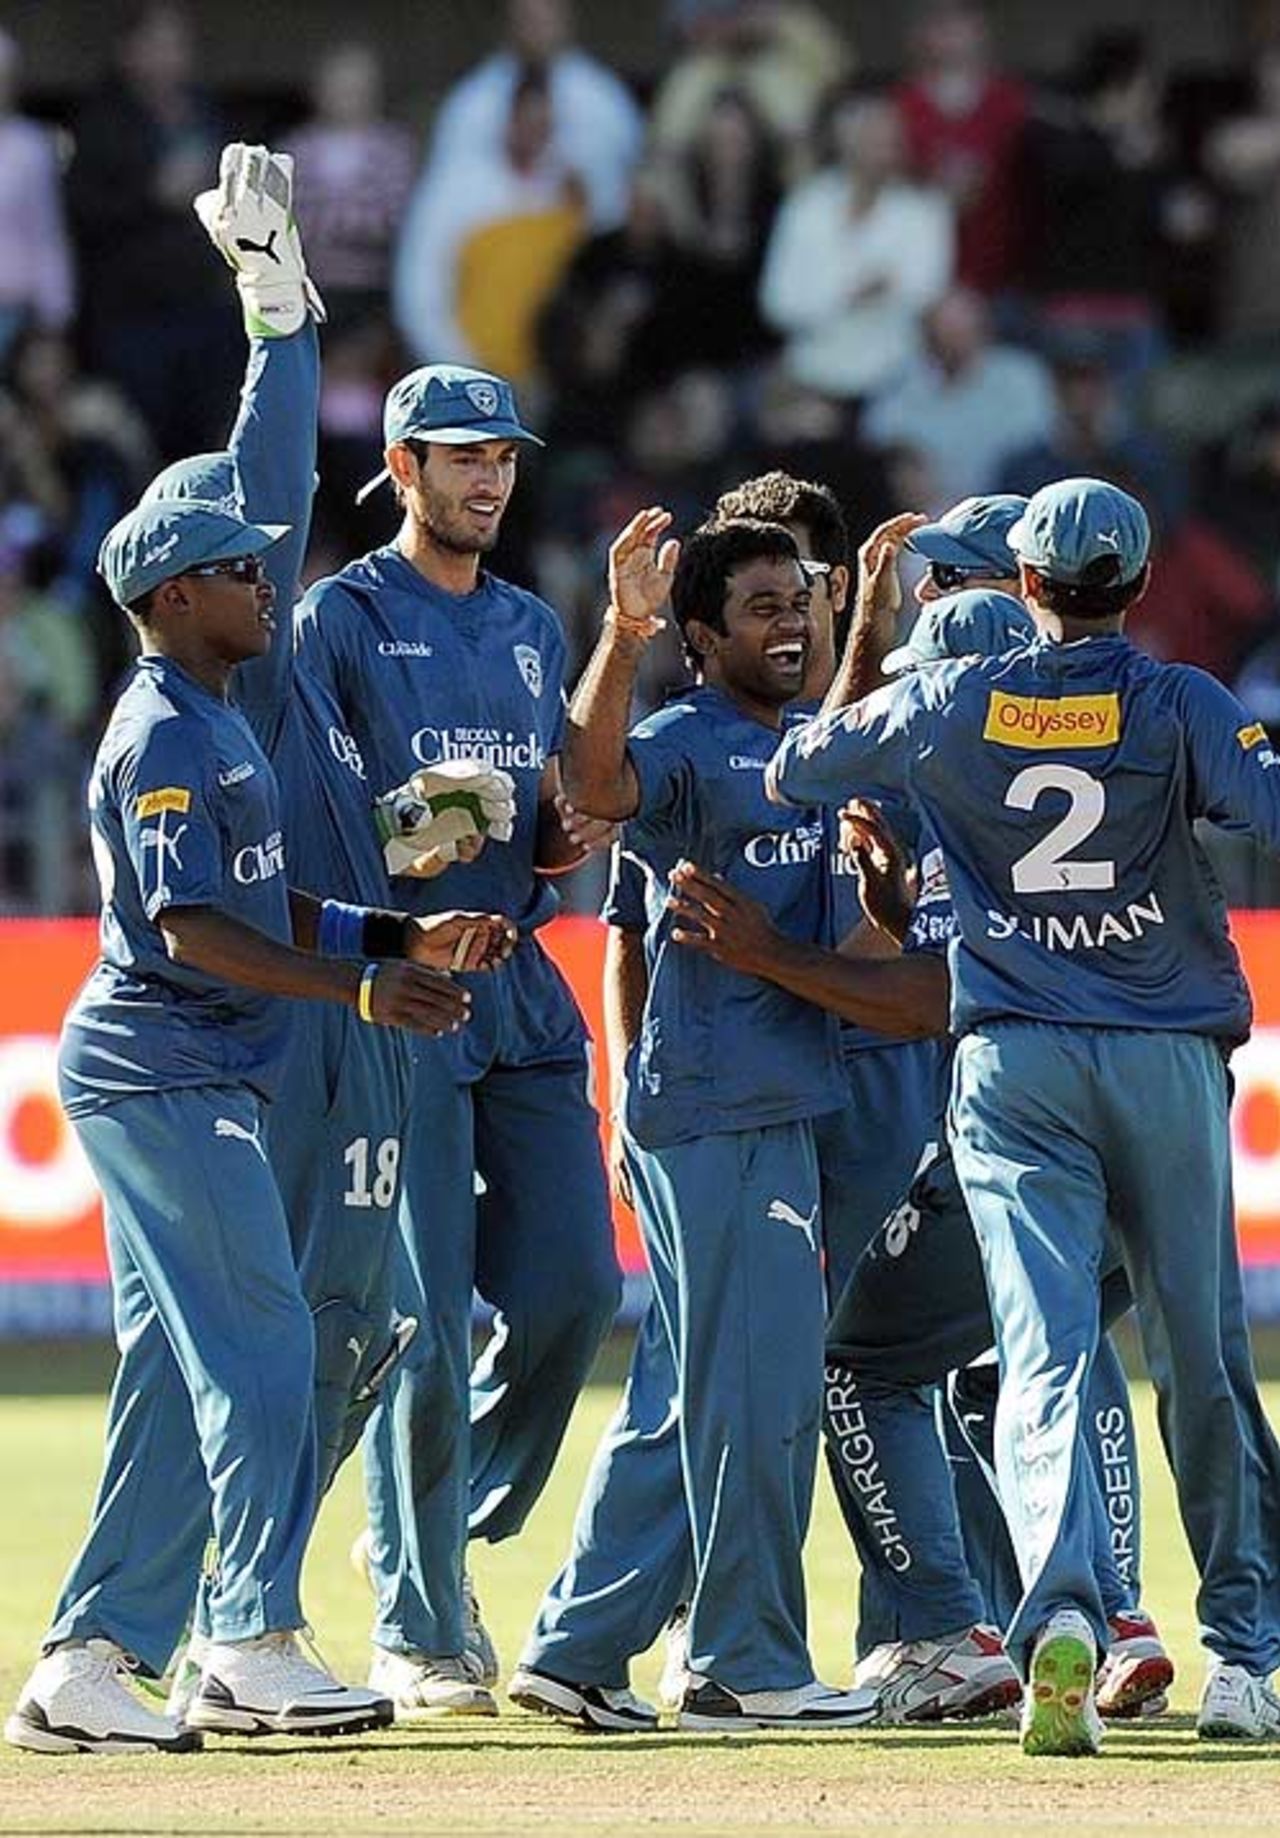 Venugopal Rao struck twice in his first over, Deccan Chargers v Rajasthan Royals, IPL, 25th match, Port Elizabeth, May 2, 2009